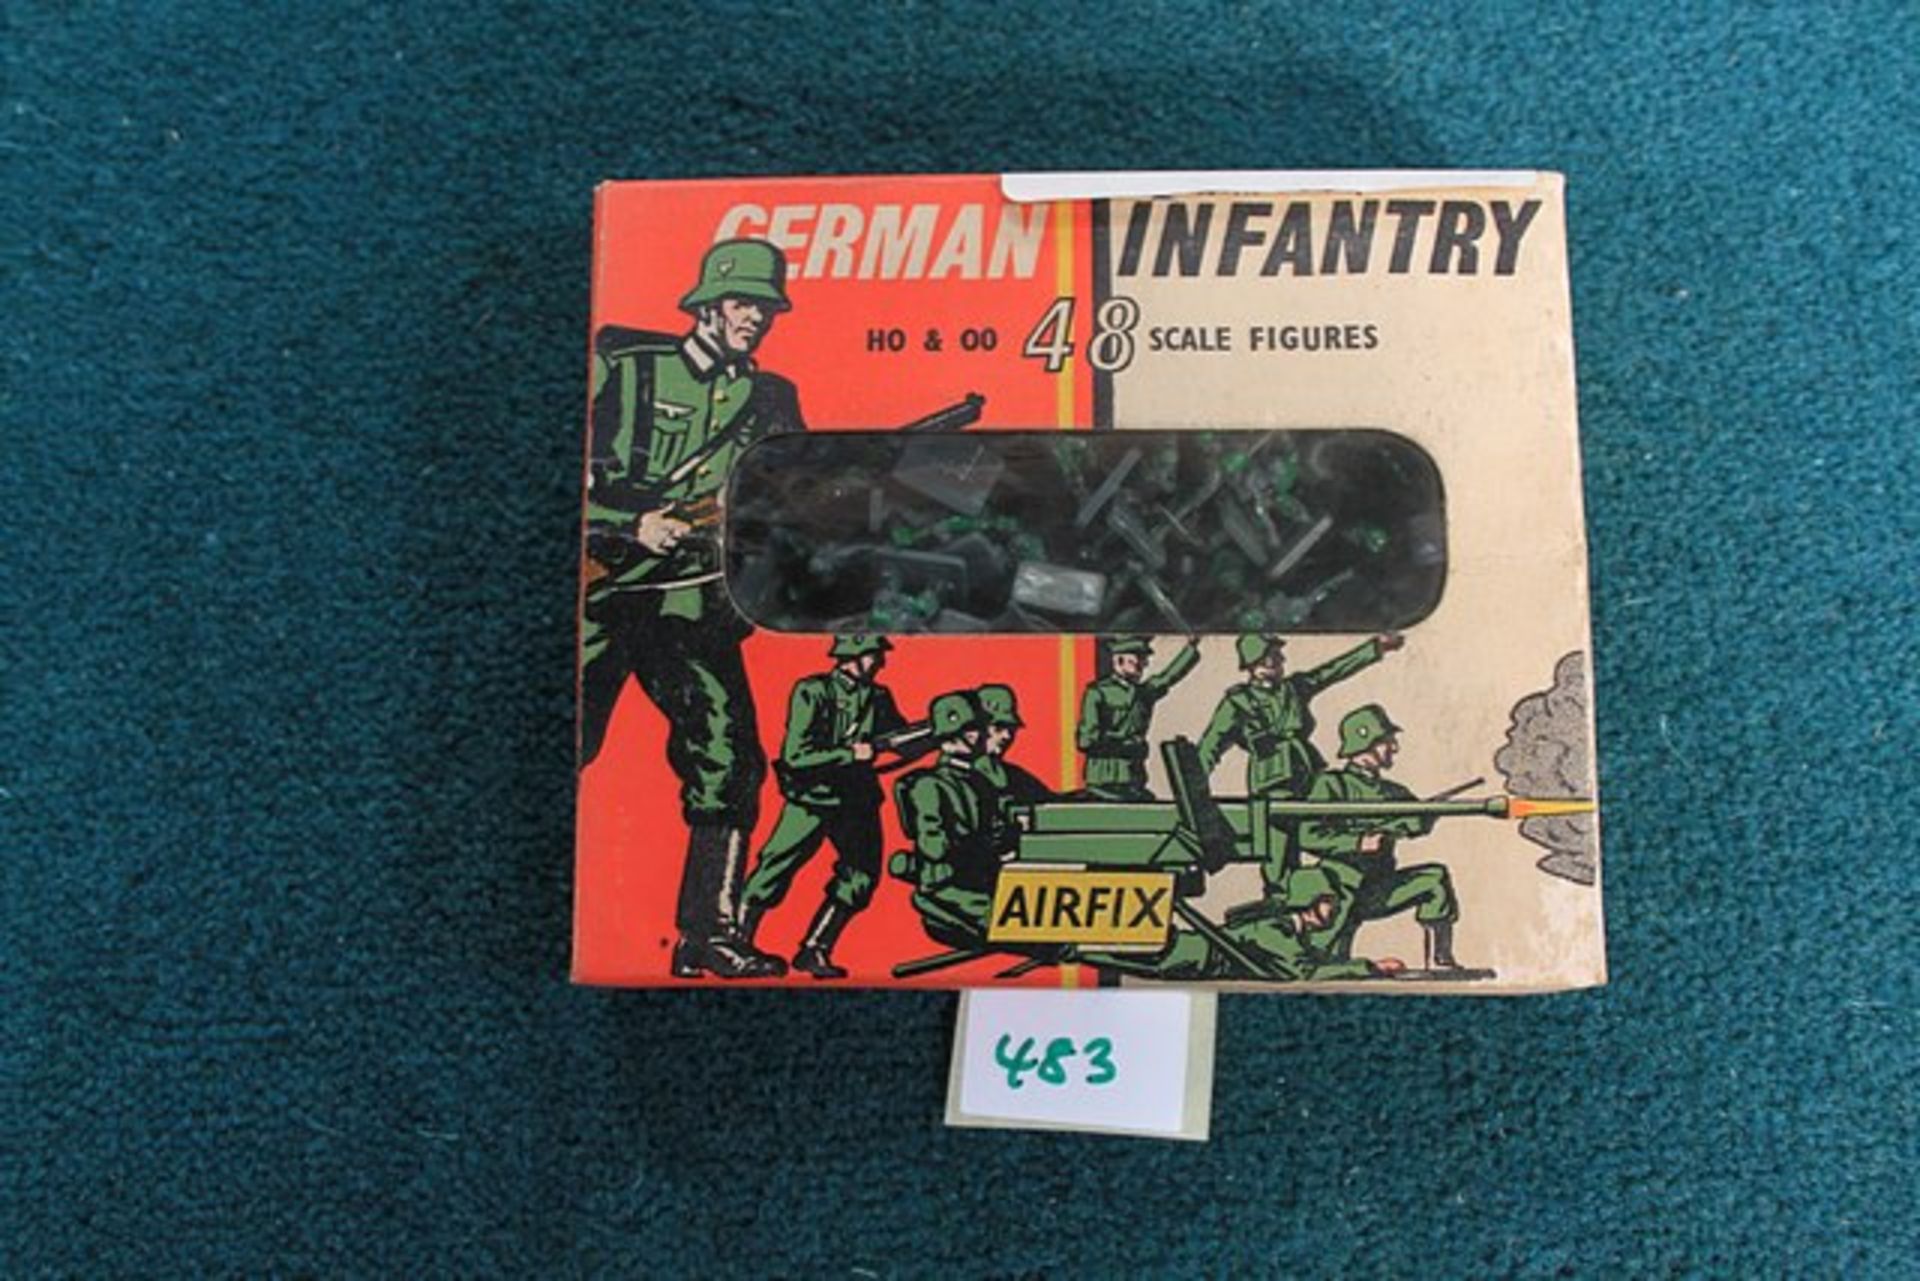 Airfix Model Kit Containing H0-00 Scale German Infantry Contains 48 Pieces Complete In Box